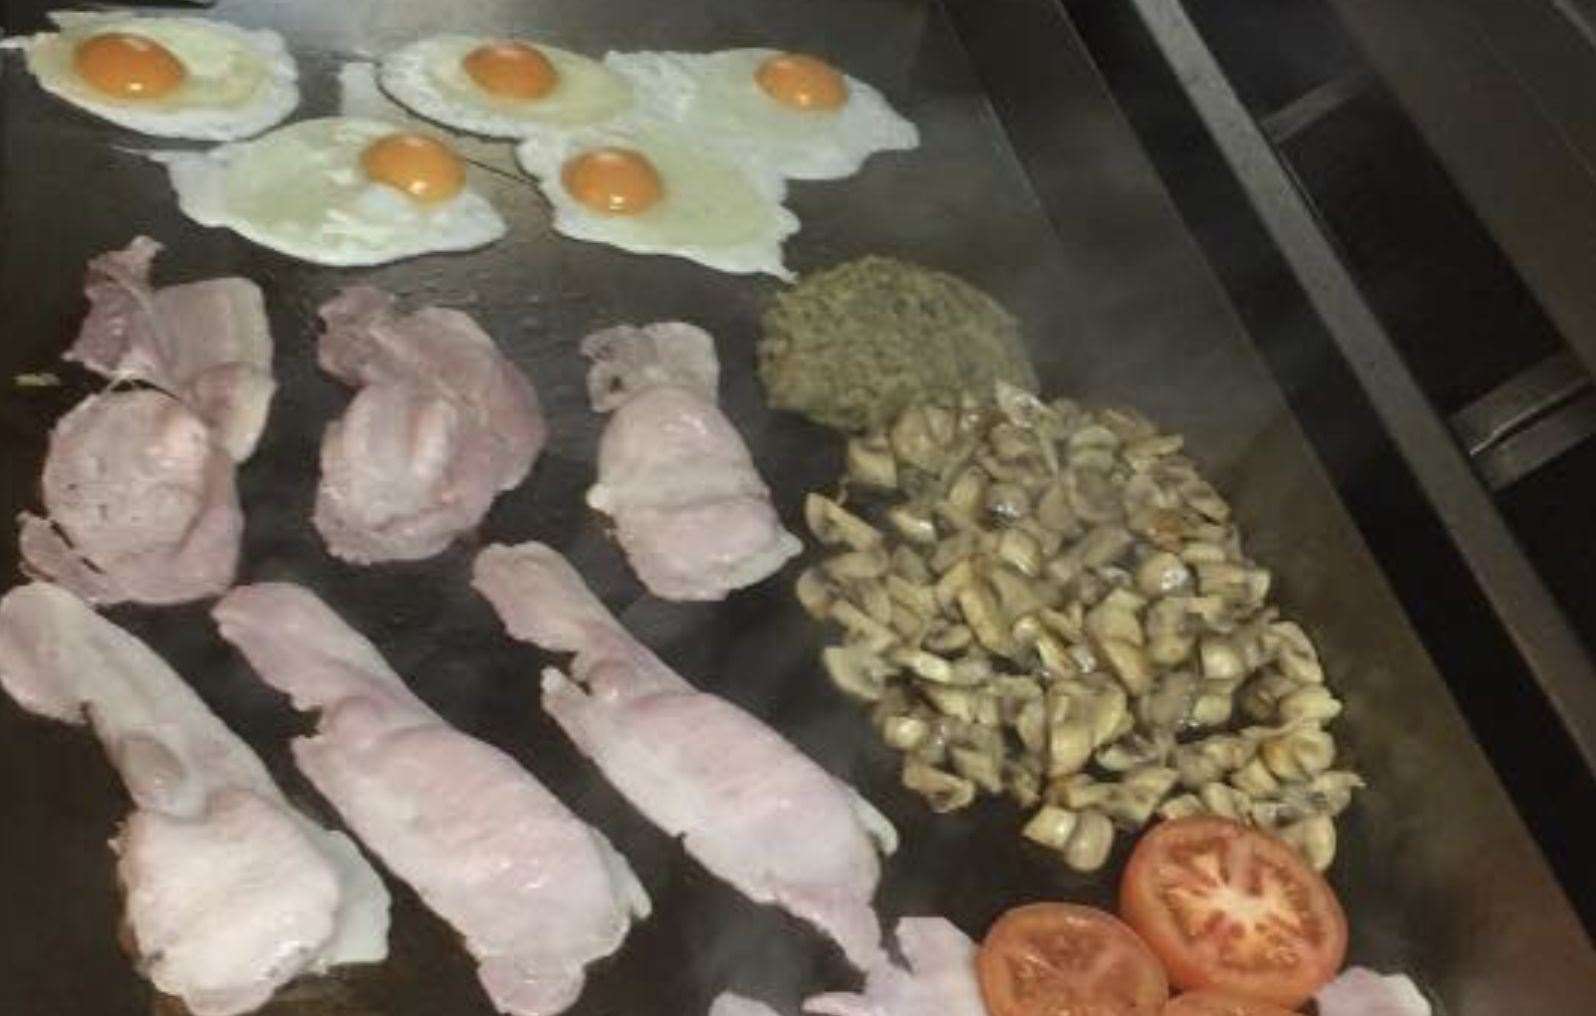 Fry-ups in the making at the Gorge in Ashford. Picture: The Gorge